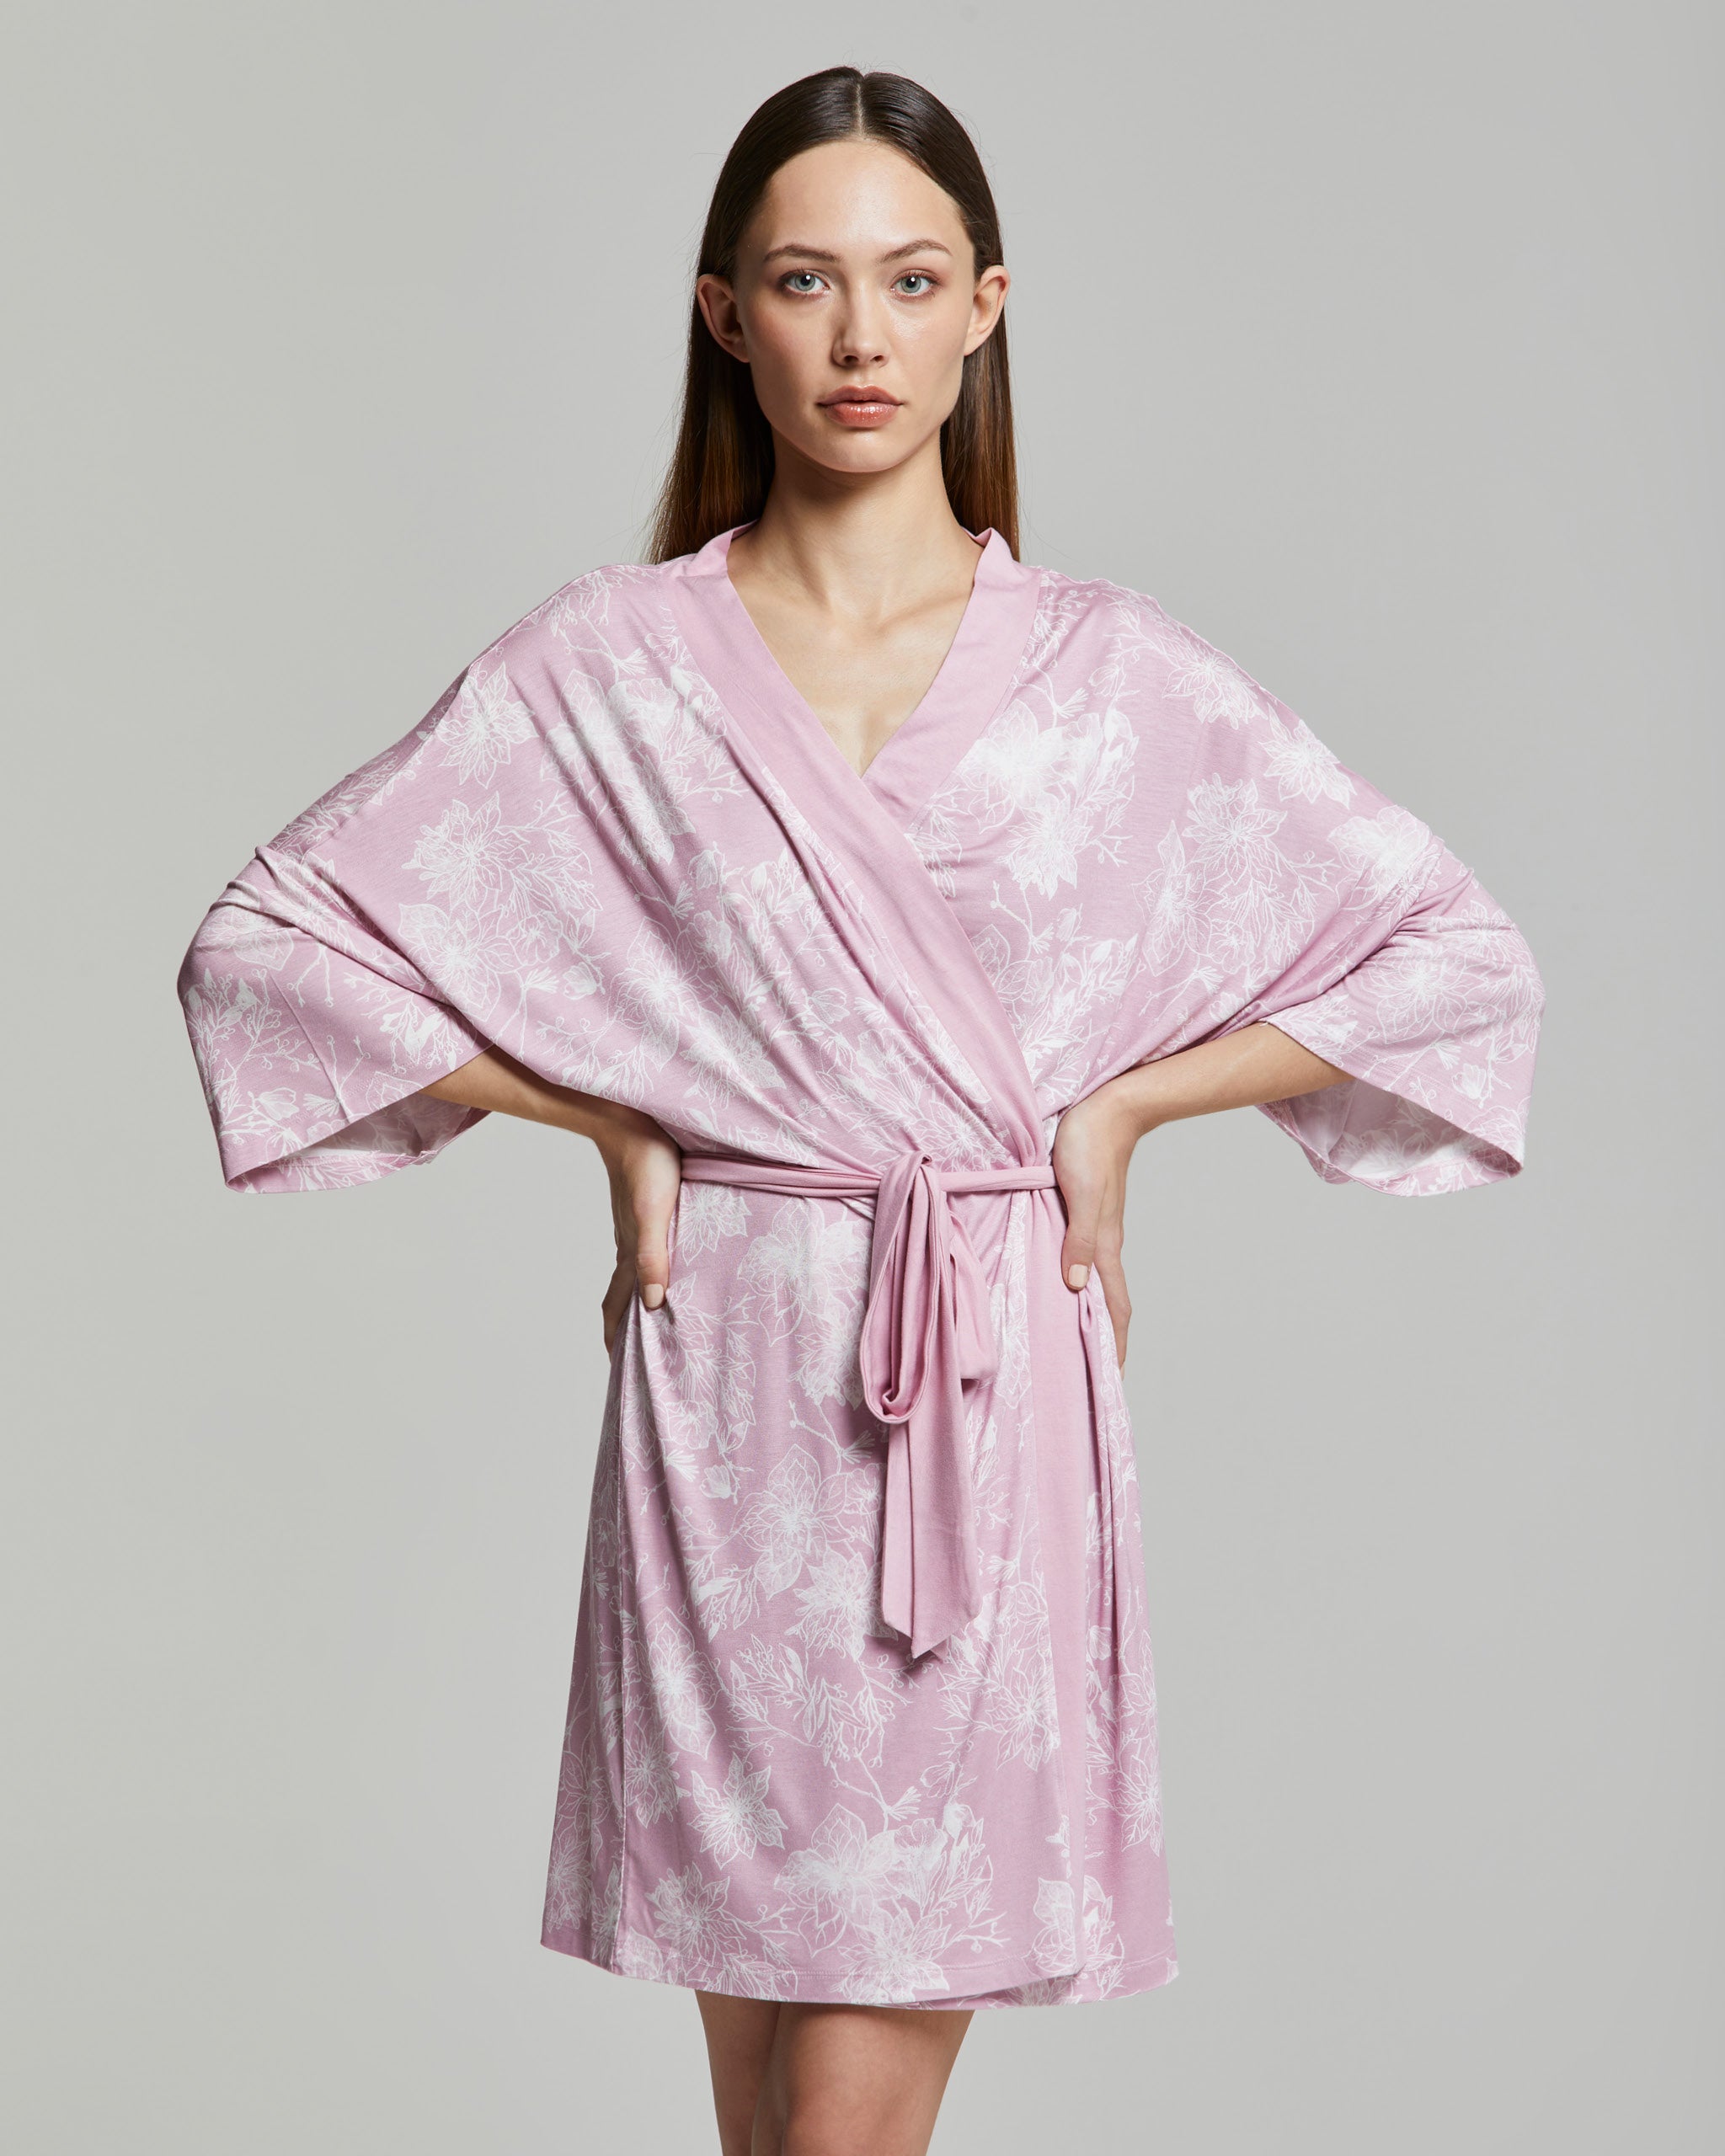 Loren dressing gown with floral print